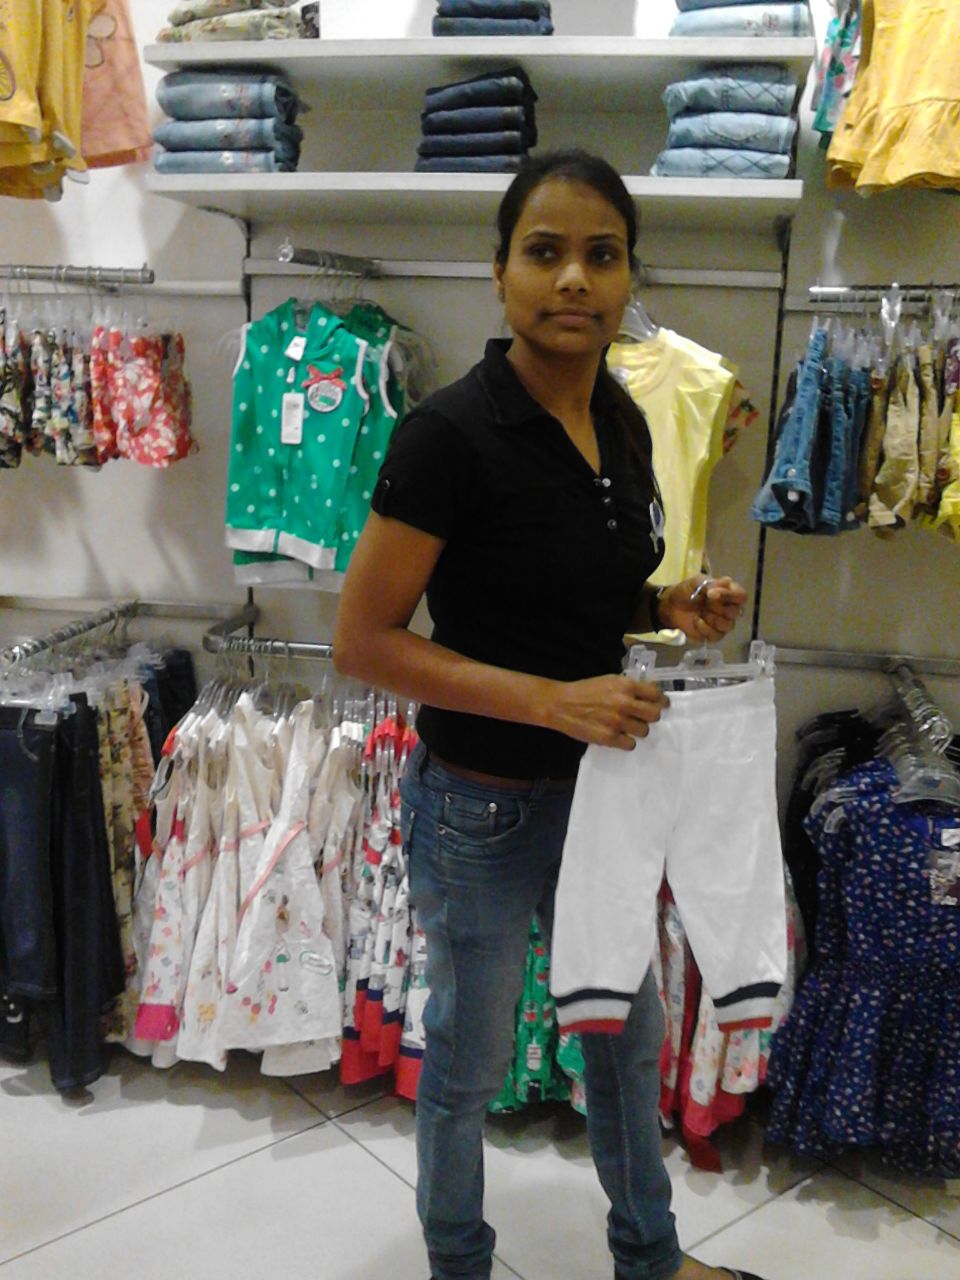 Candidate Kamla - Speech/Hearing impaired girl who has been hired by Max Stores in Jaipur